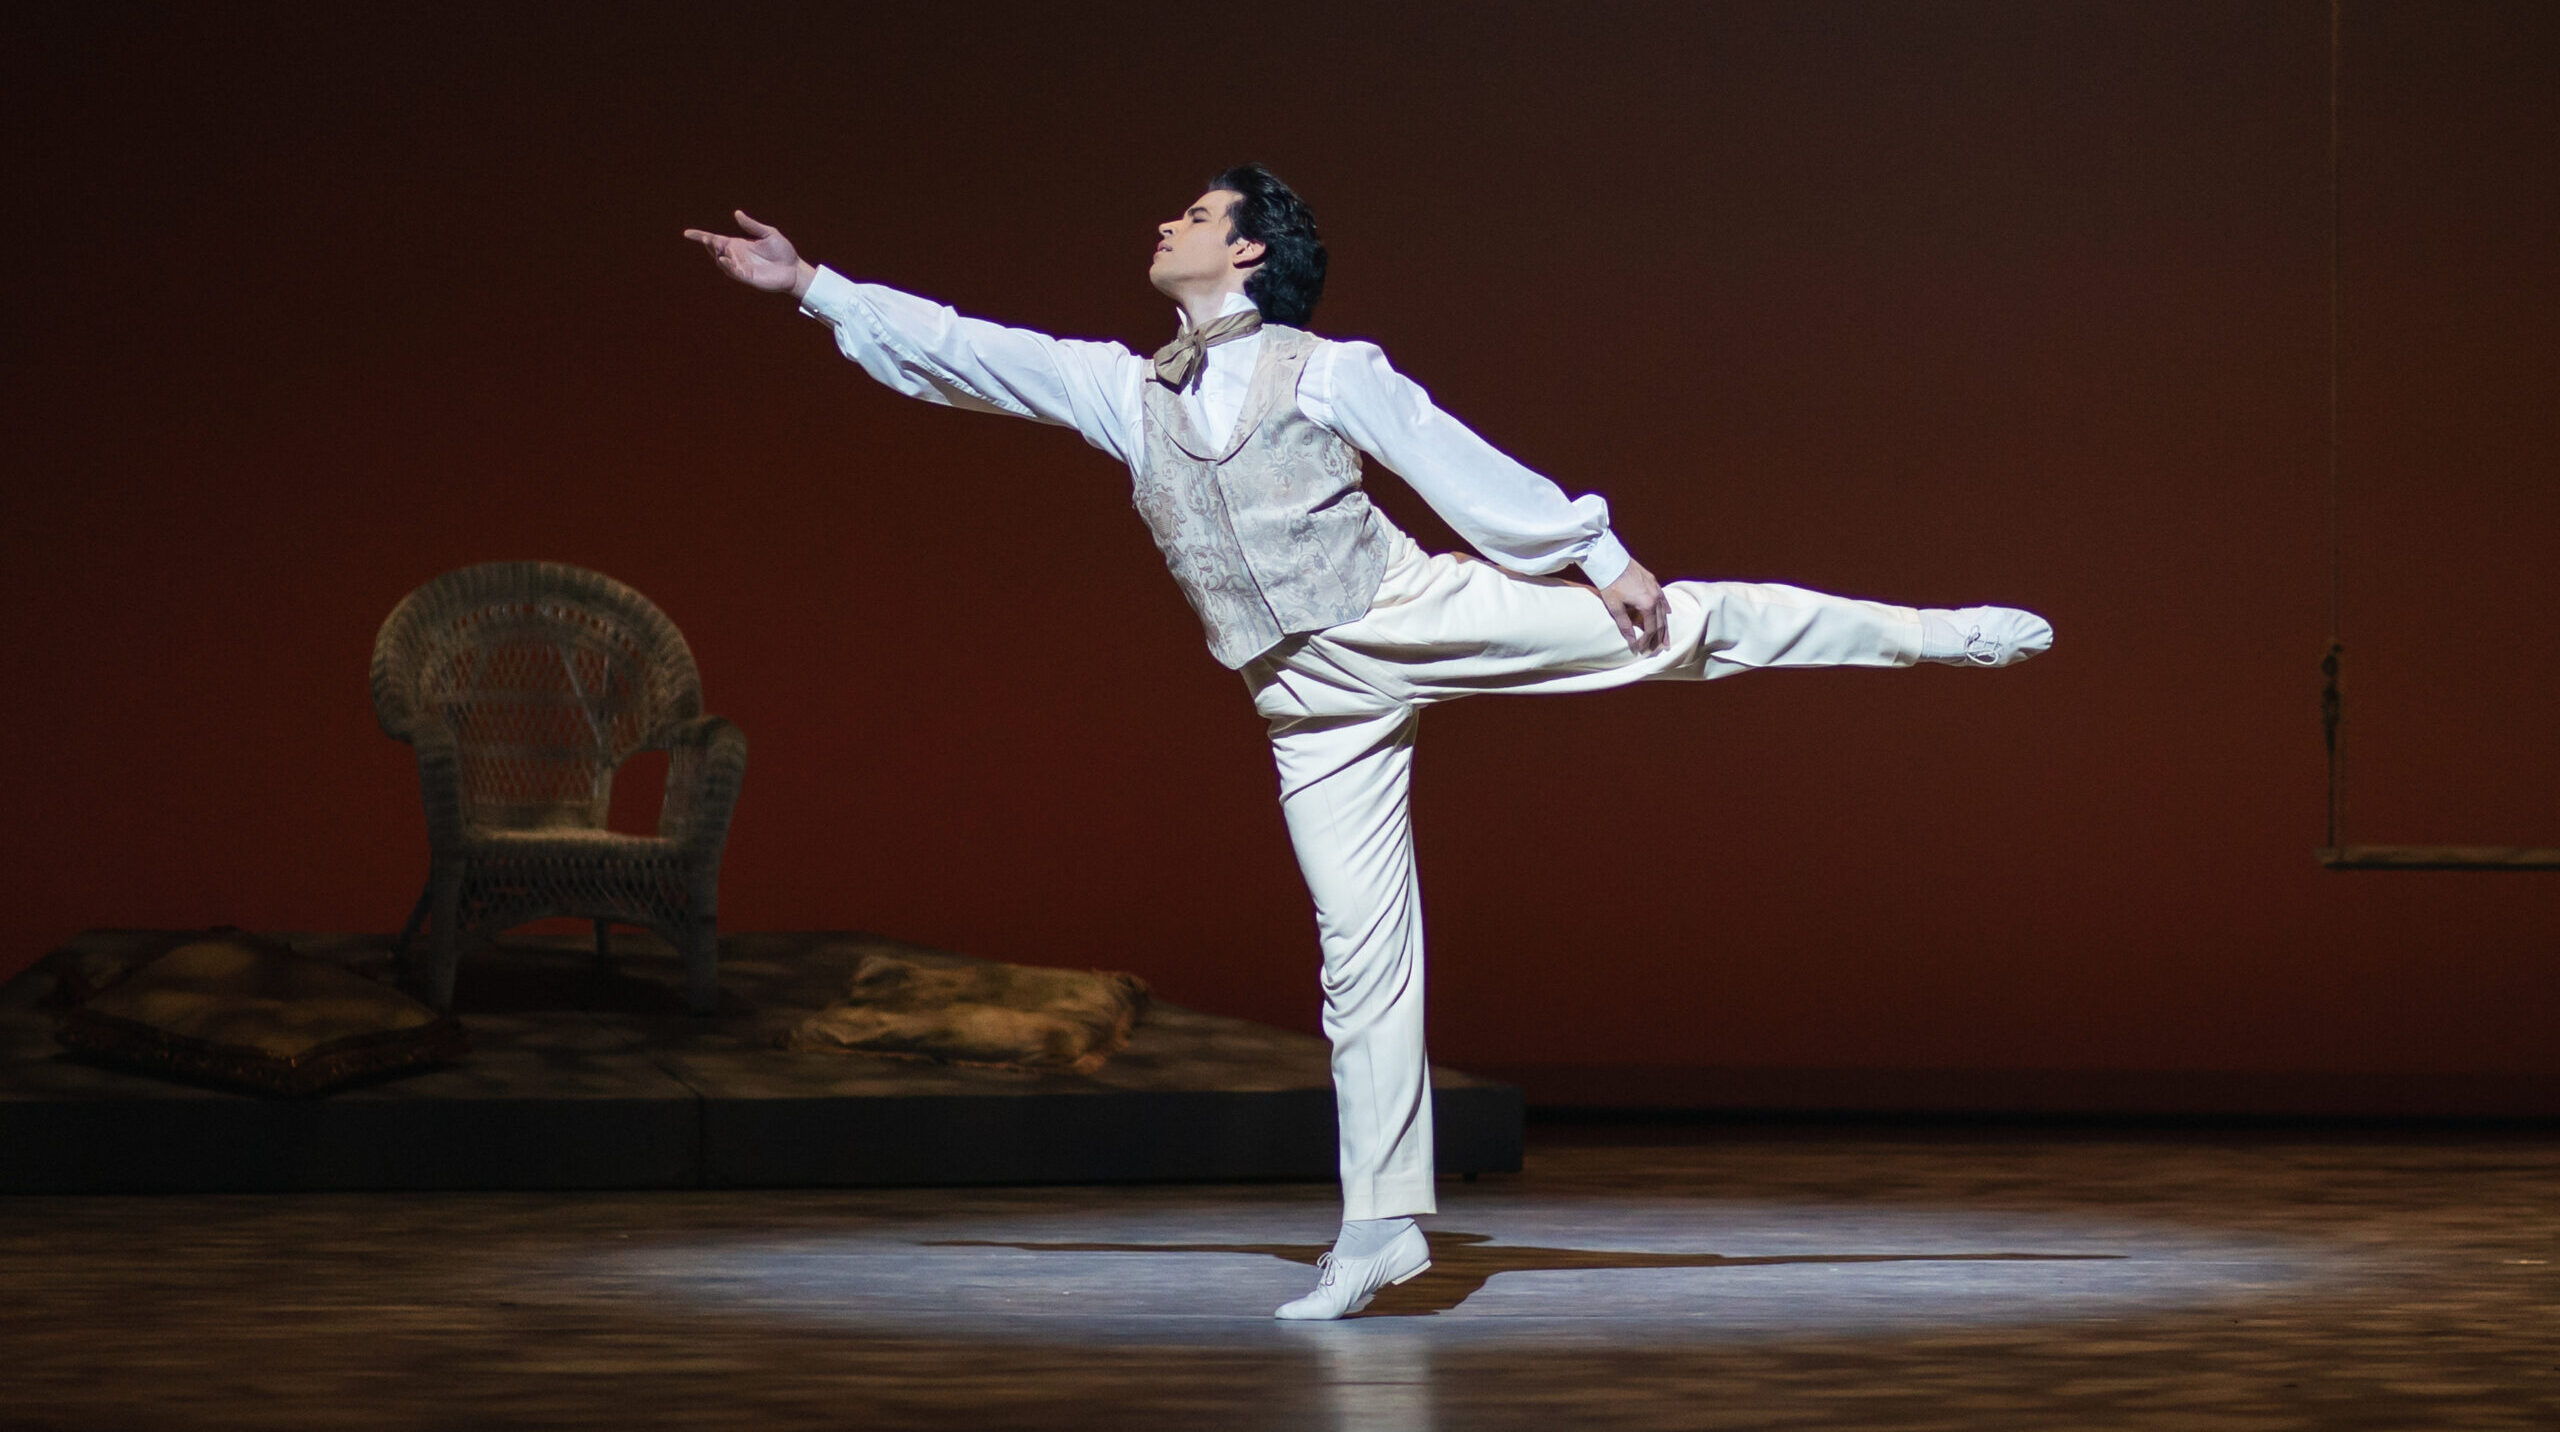 Onstage, a male dancer in a white, cream, and light tan suit costume does an arabesque onstage, his right arm reaching forward with longing.